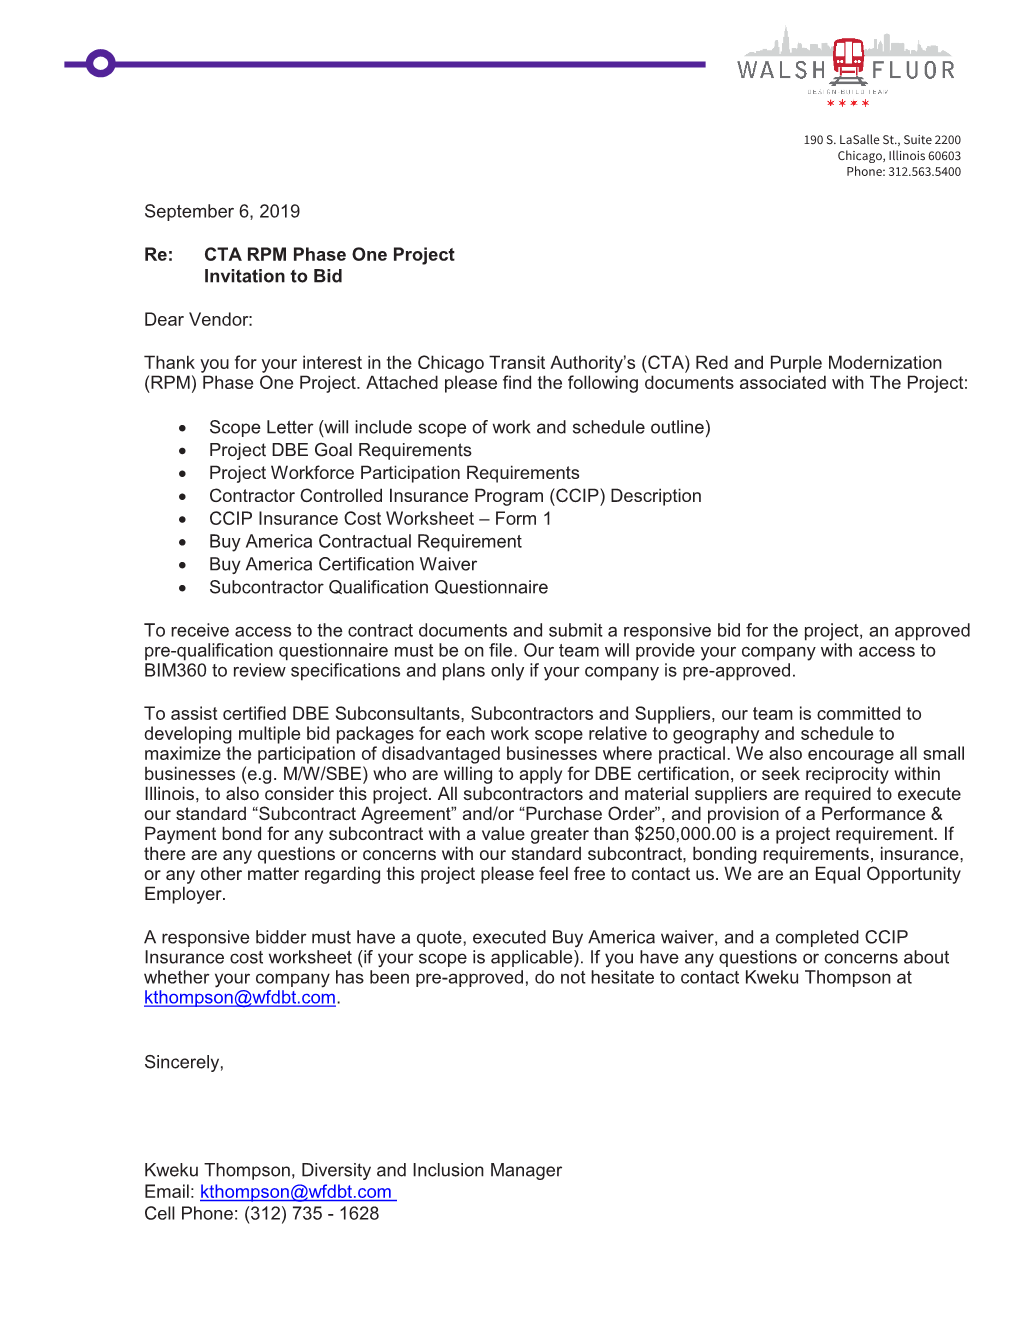 September 6, 2019 Re: CTA RPM Phase One Project Invitation to Bid